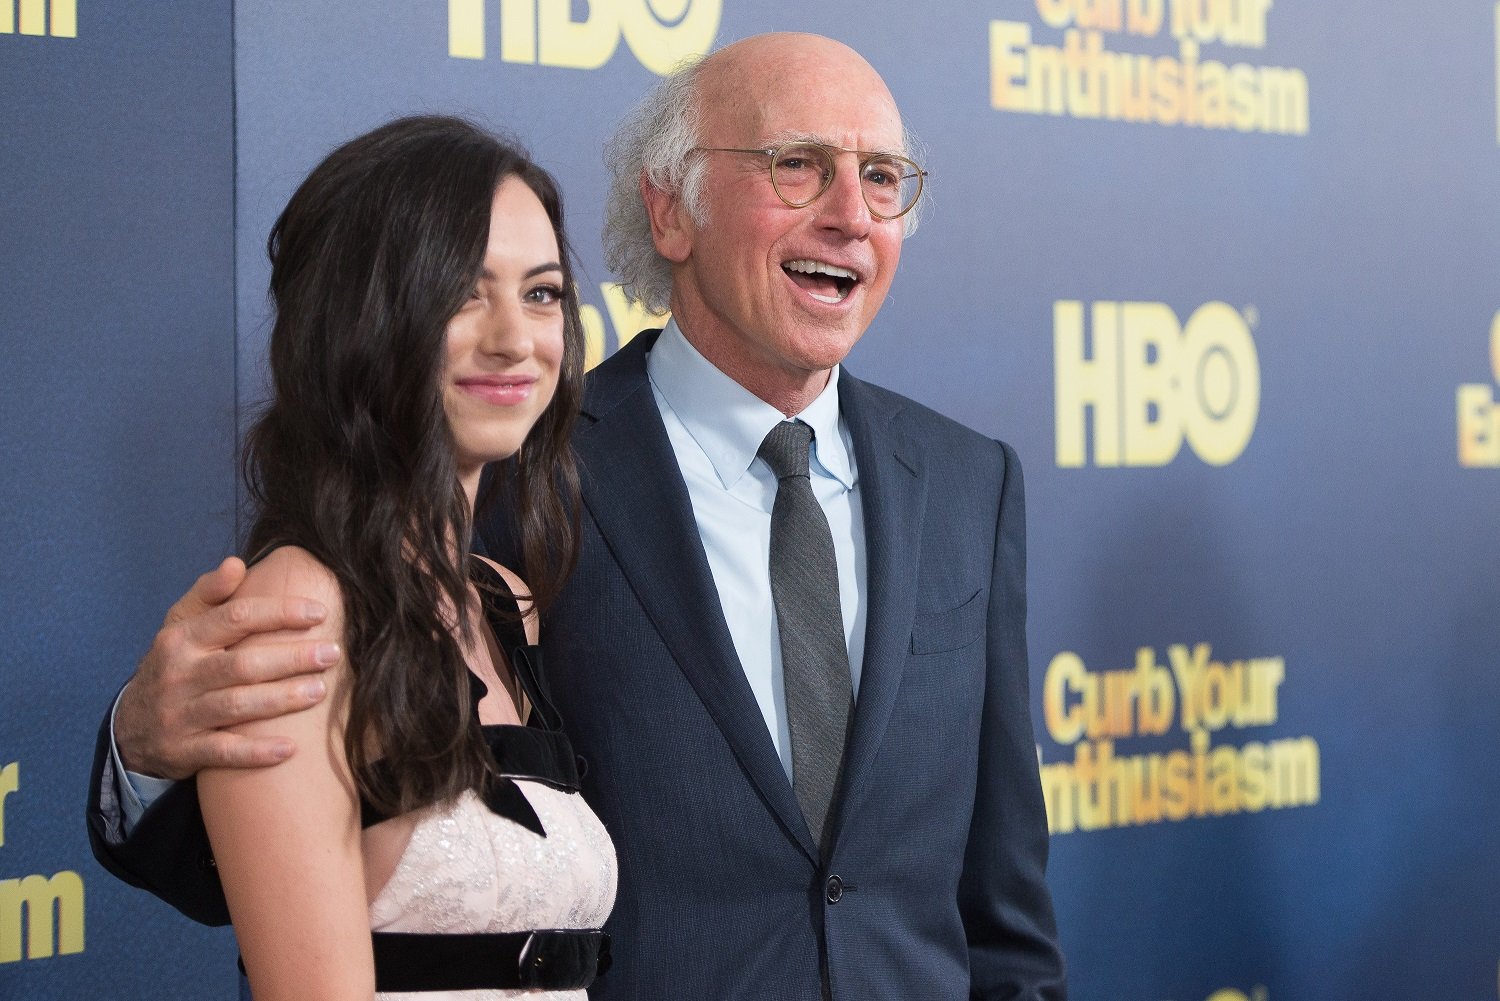 Cazzie David and Larry David attend the Curb Your Enthusiasm Season 9 premiere at SVA Theater on September 27, 2017 in New York City.